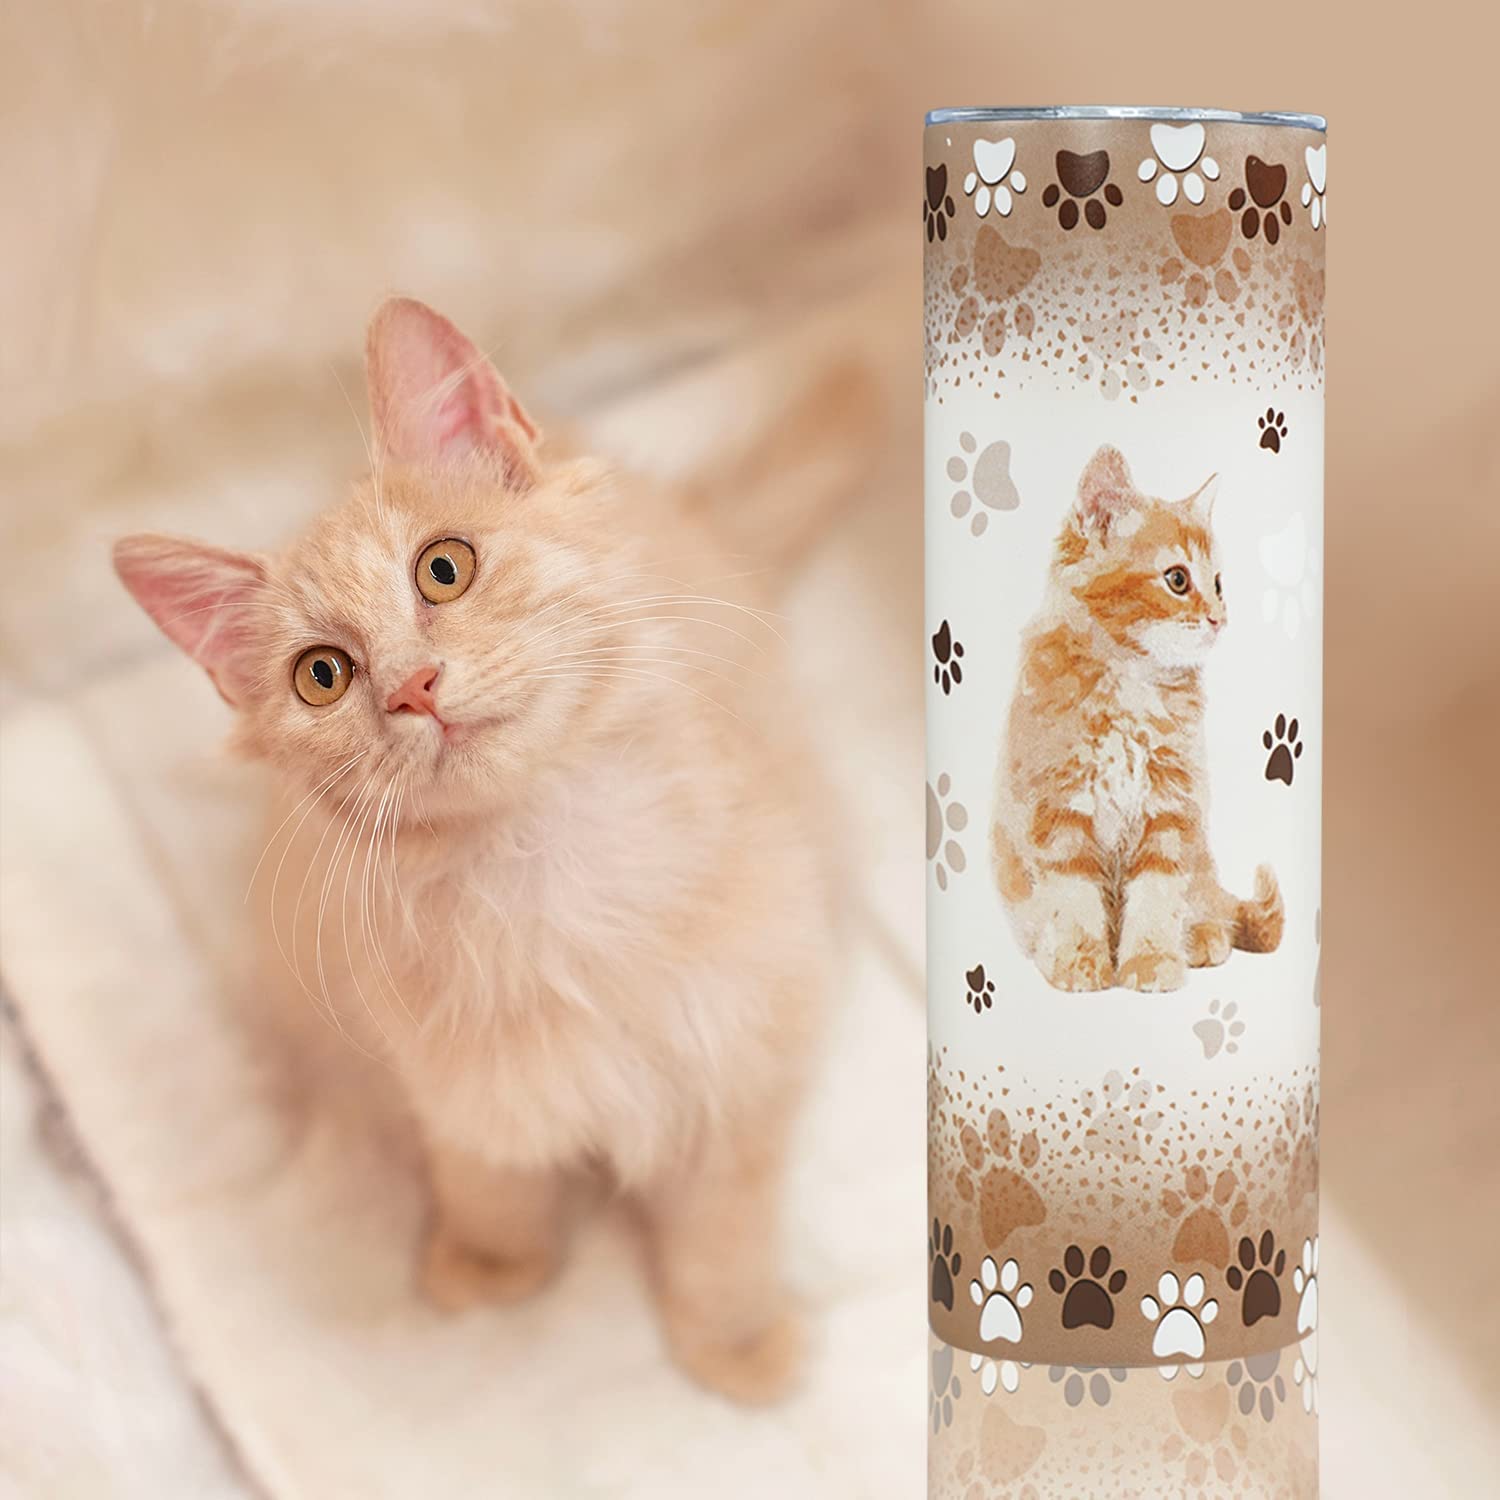 Cat Tumbler, Funny Cat Gifts for Cat Lovers, Cat Travel Mug/Coffee  Mugs/Water Bottle, Cat Lover Gifts for Women, Cute Cat Stuff/Decor for Cat  Lovers, Cat Themed Gifts for Women, Girls - Cat